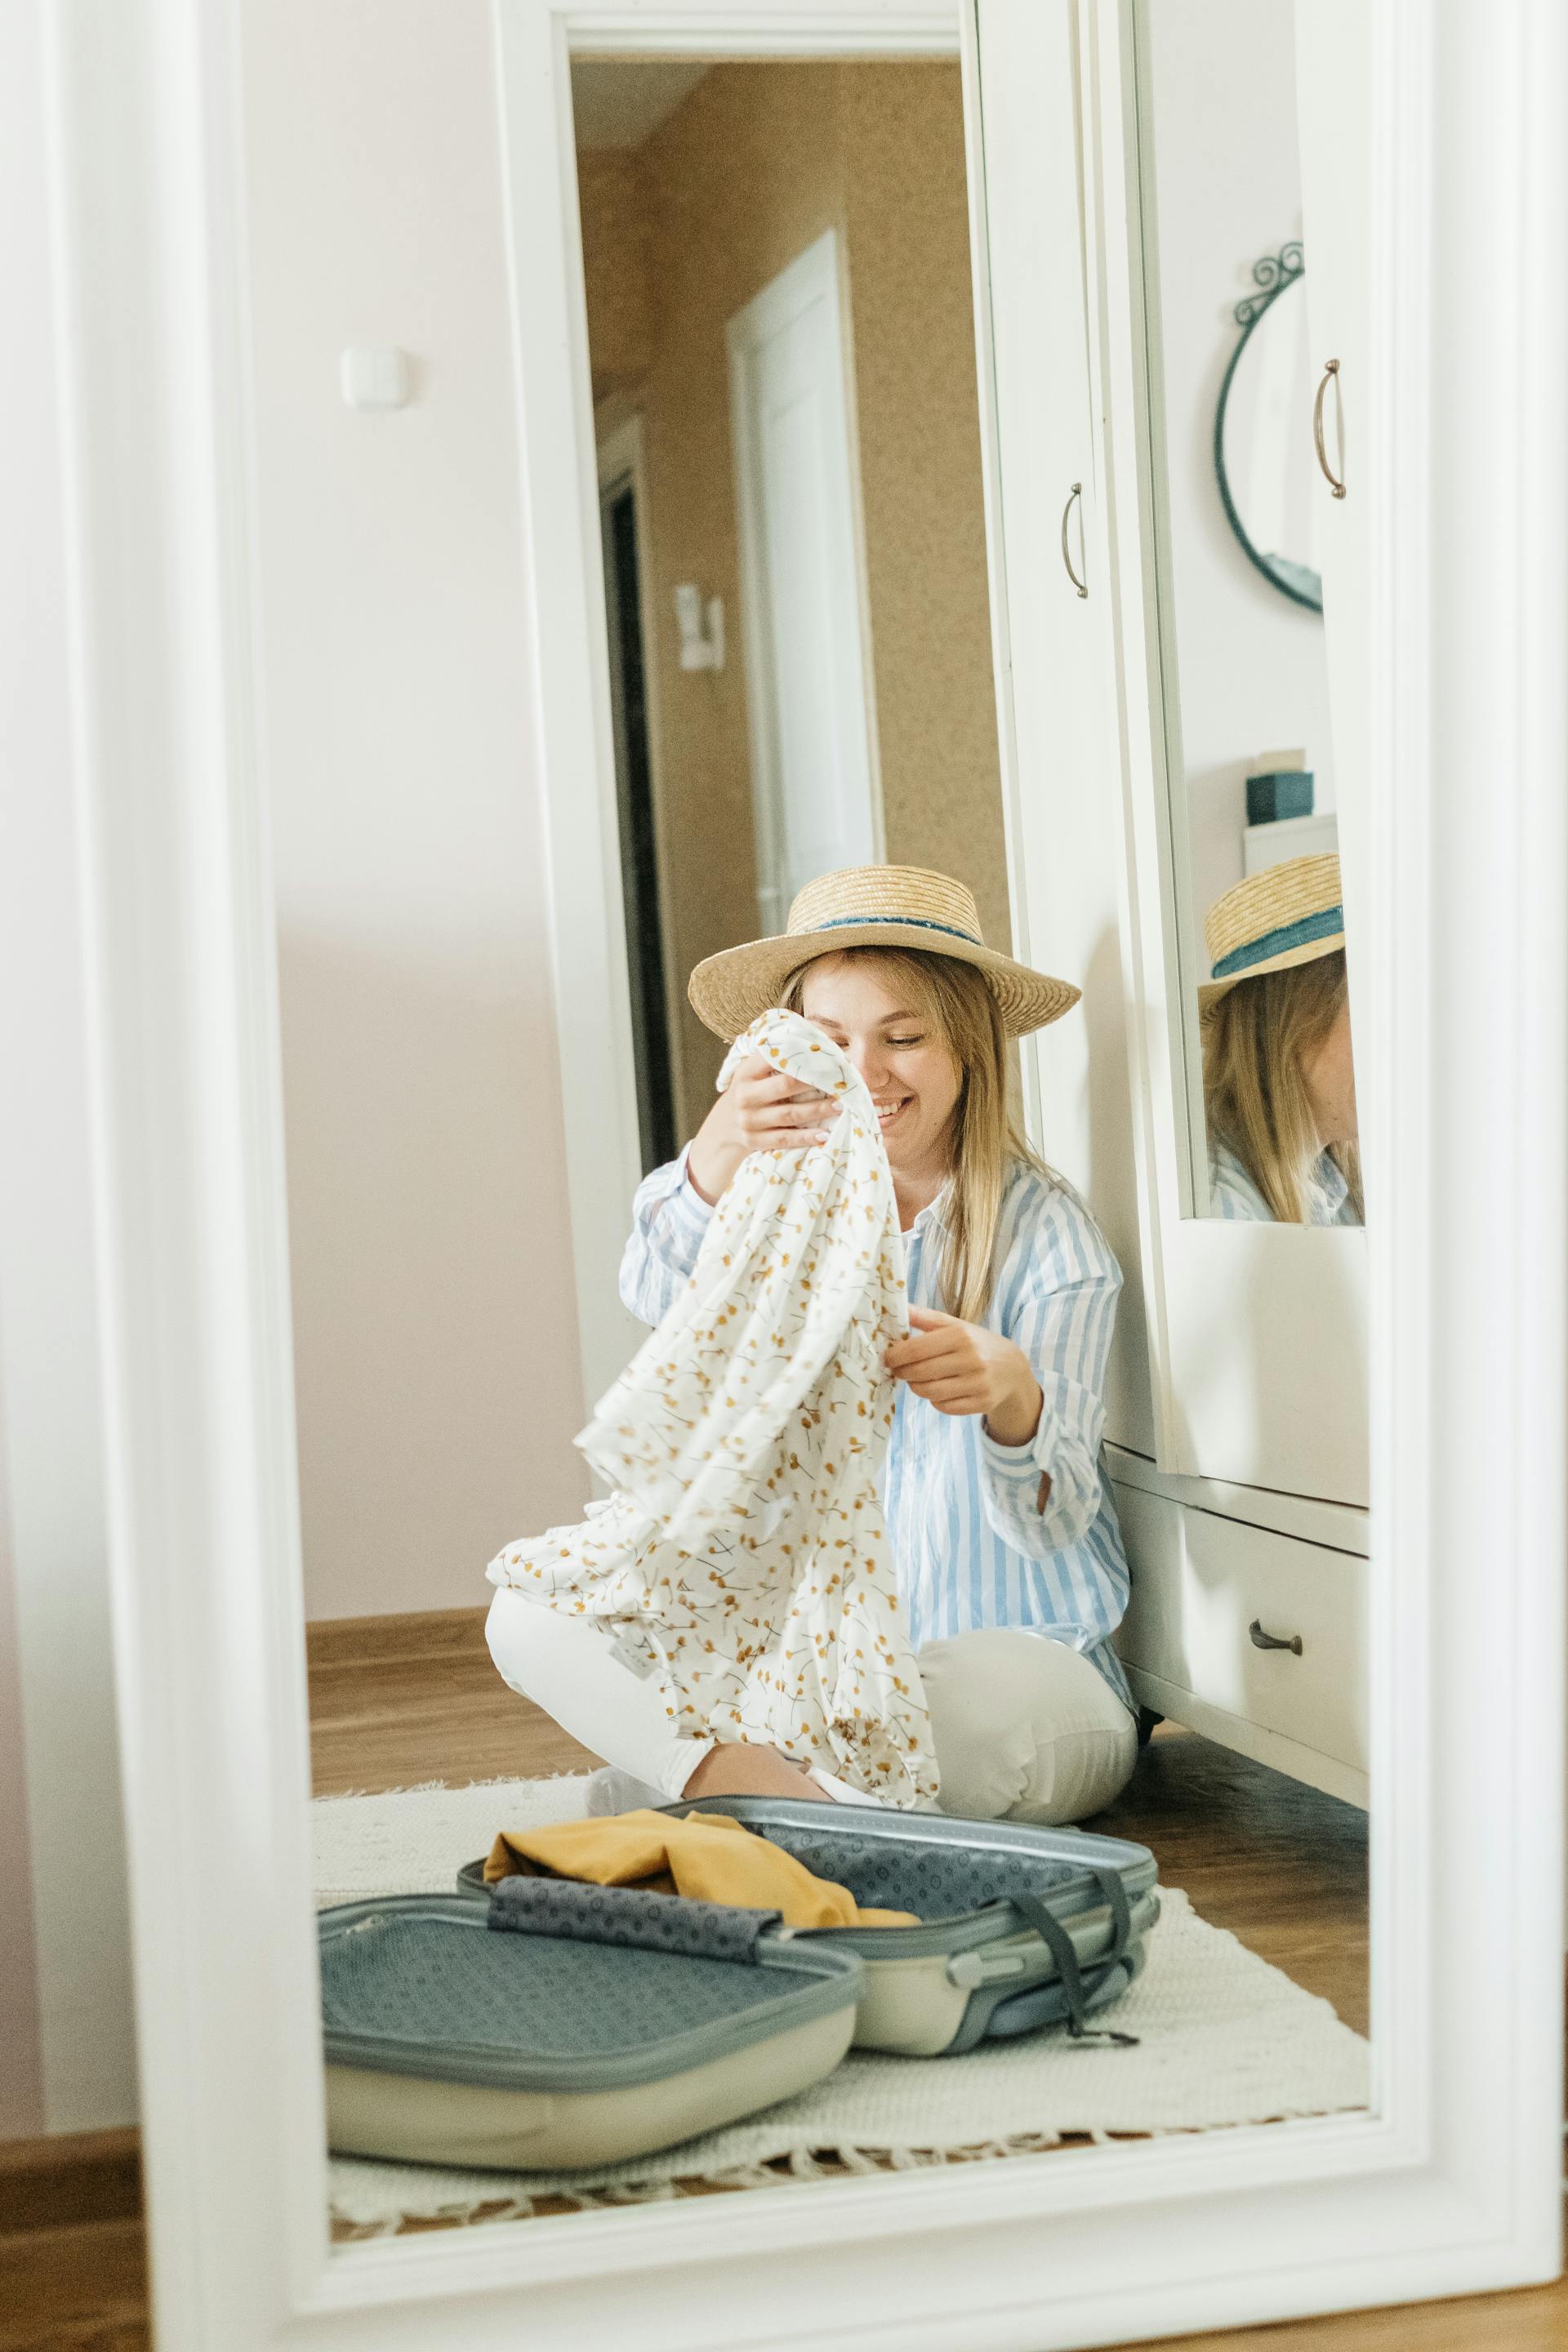 A woman packing clothes | Source: Pexels